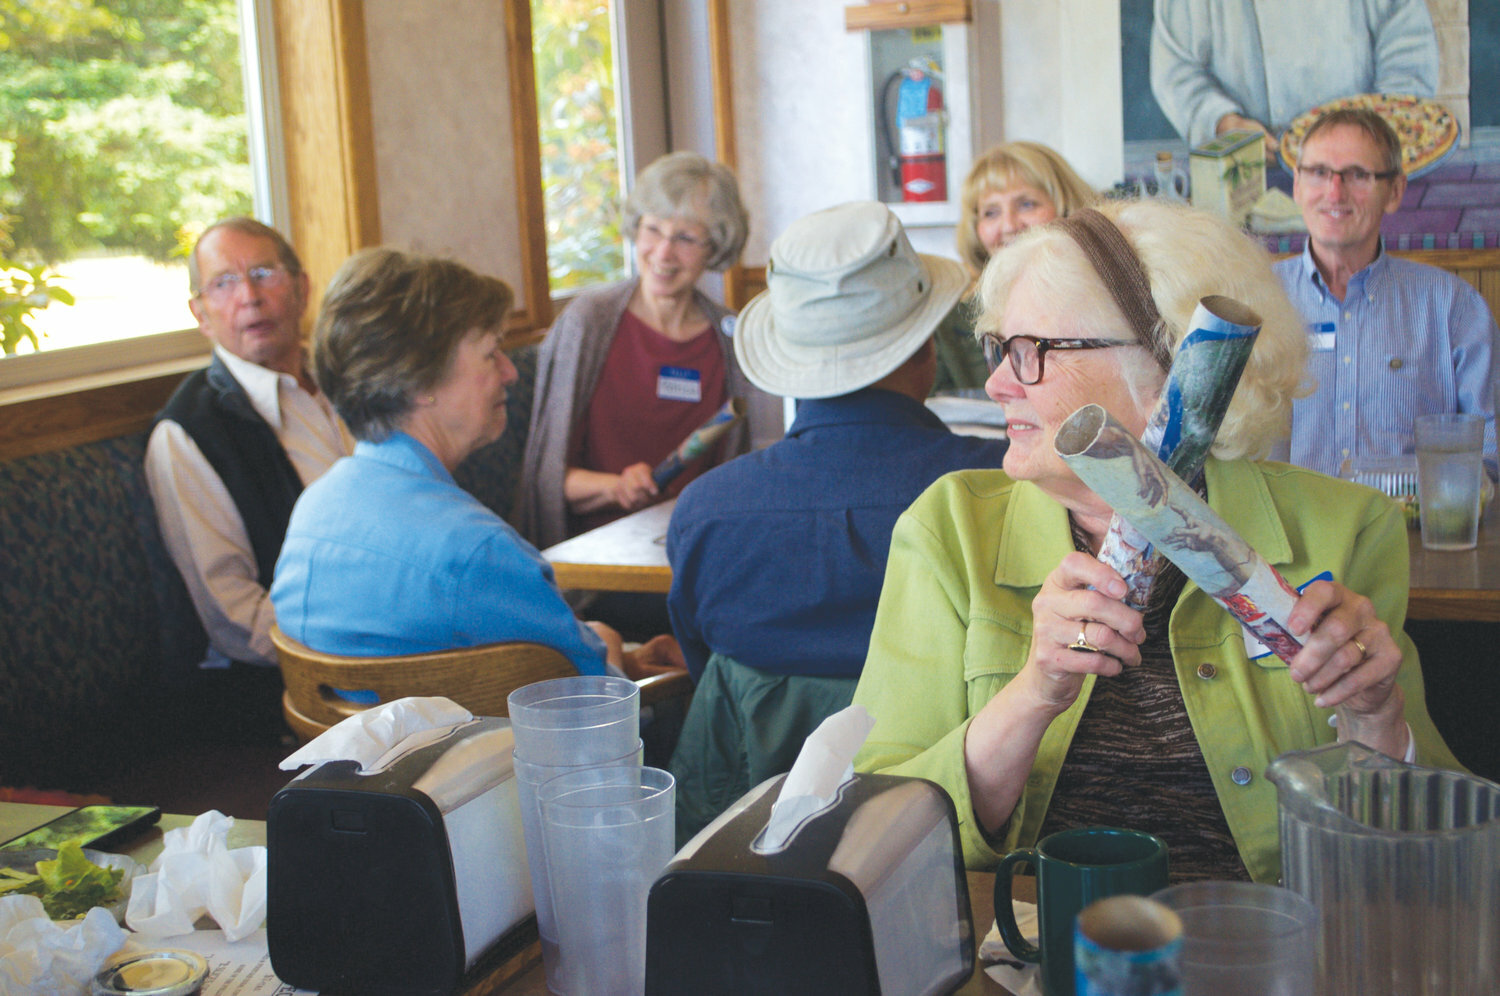 Eleanor Lee sings along with the group gathered at Ferino’s Pizza on June 27, 2019 for the one-year anniversary of the Memory Cafe. Leader file photo